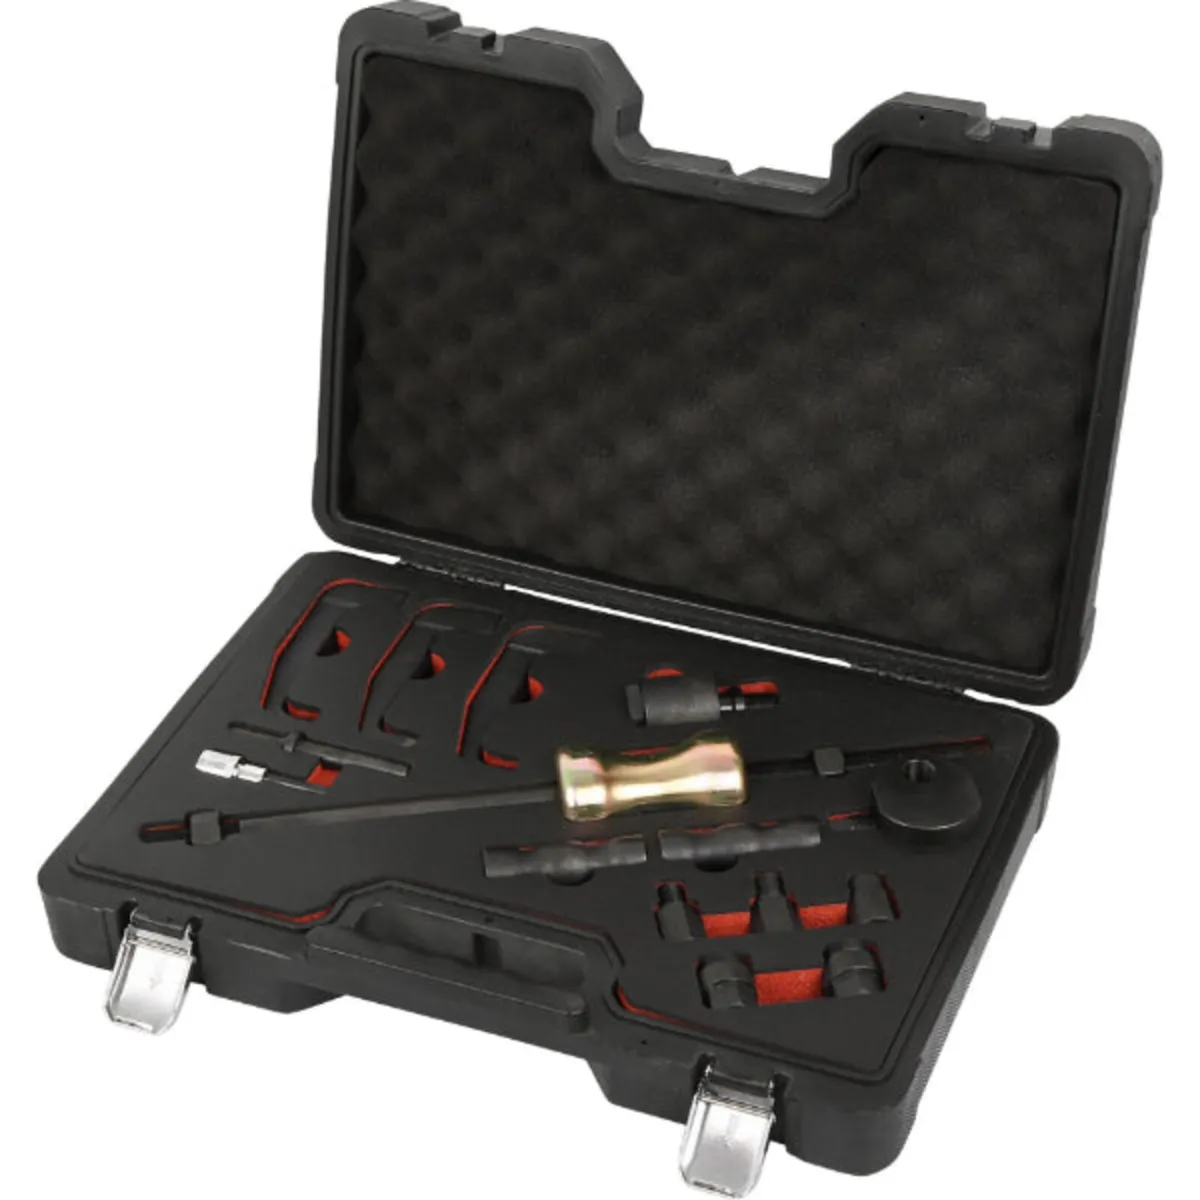 INJECTOR REMOVAL TOOL KIT FOR USE WITH AIR HAMMER - Image 1